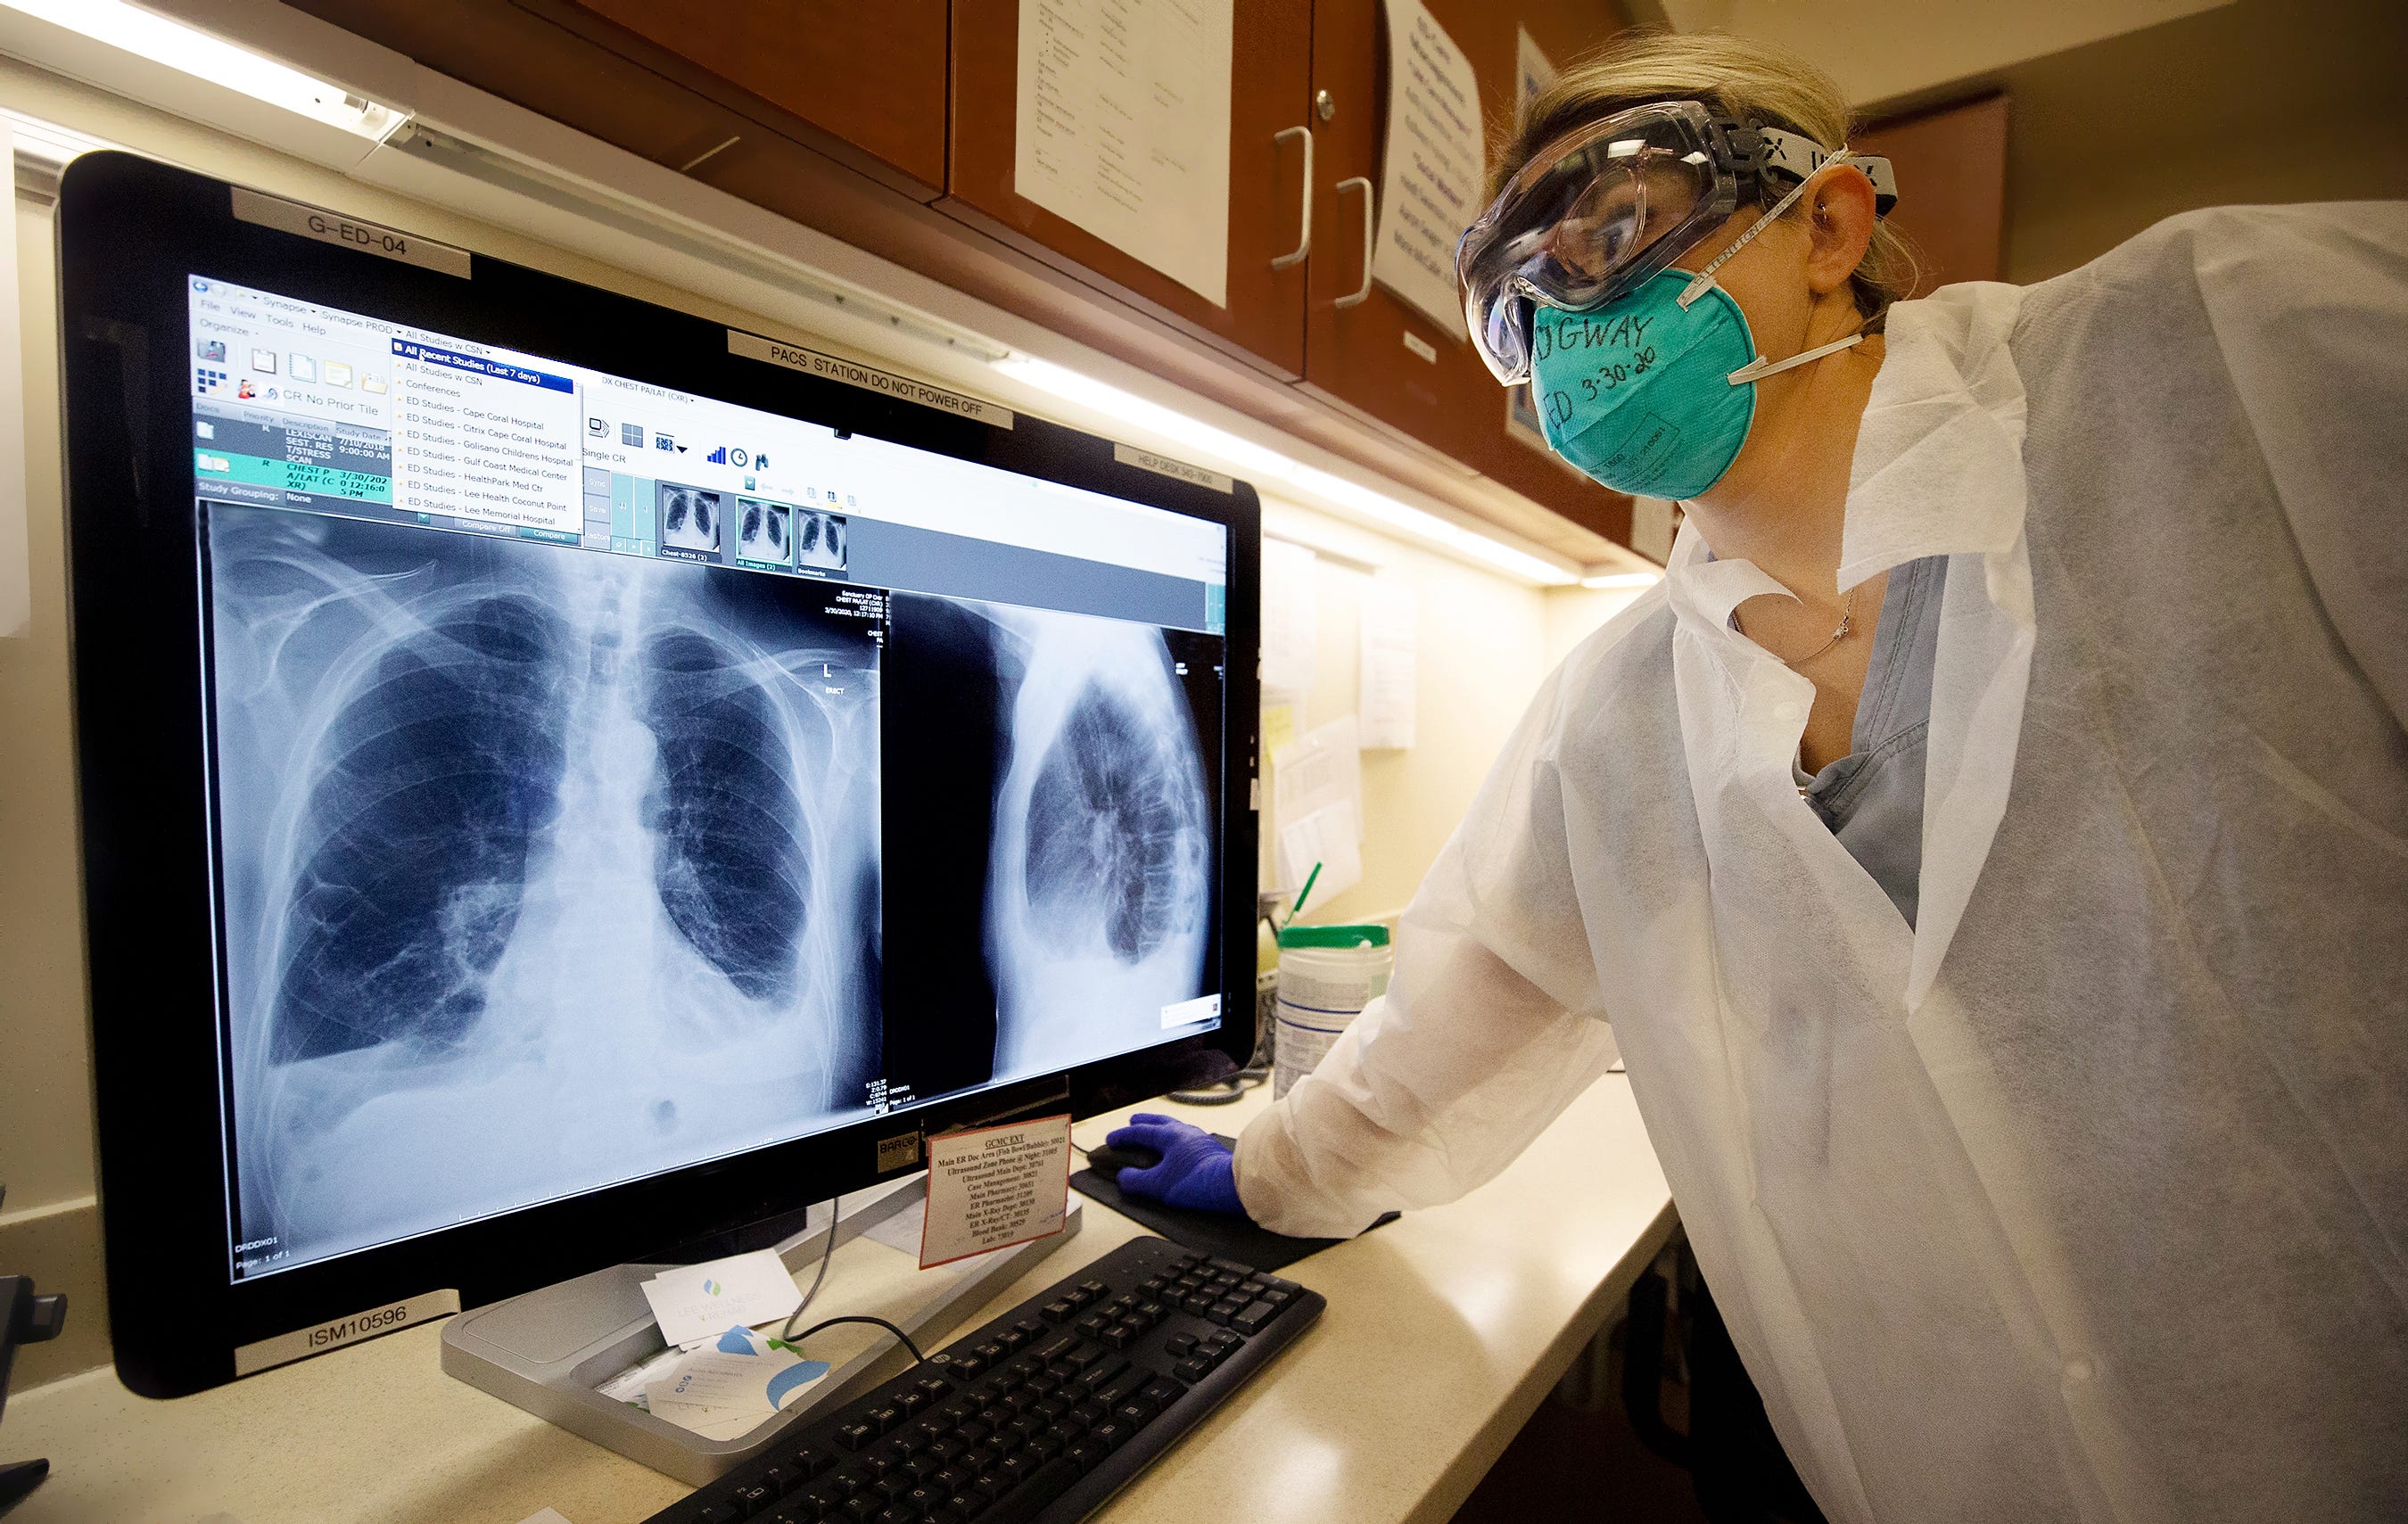 Physician assistant Allison Ridgway reads a COVID-19 patient's X-ray at Gulf Coast Medical Center in Fort Myers, Florida. (Note: Portions of this image have been edited to remove patient information)